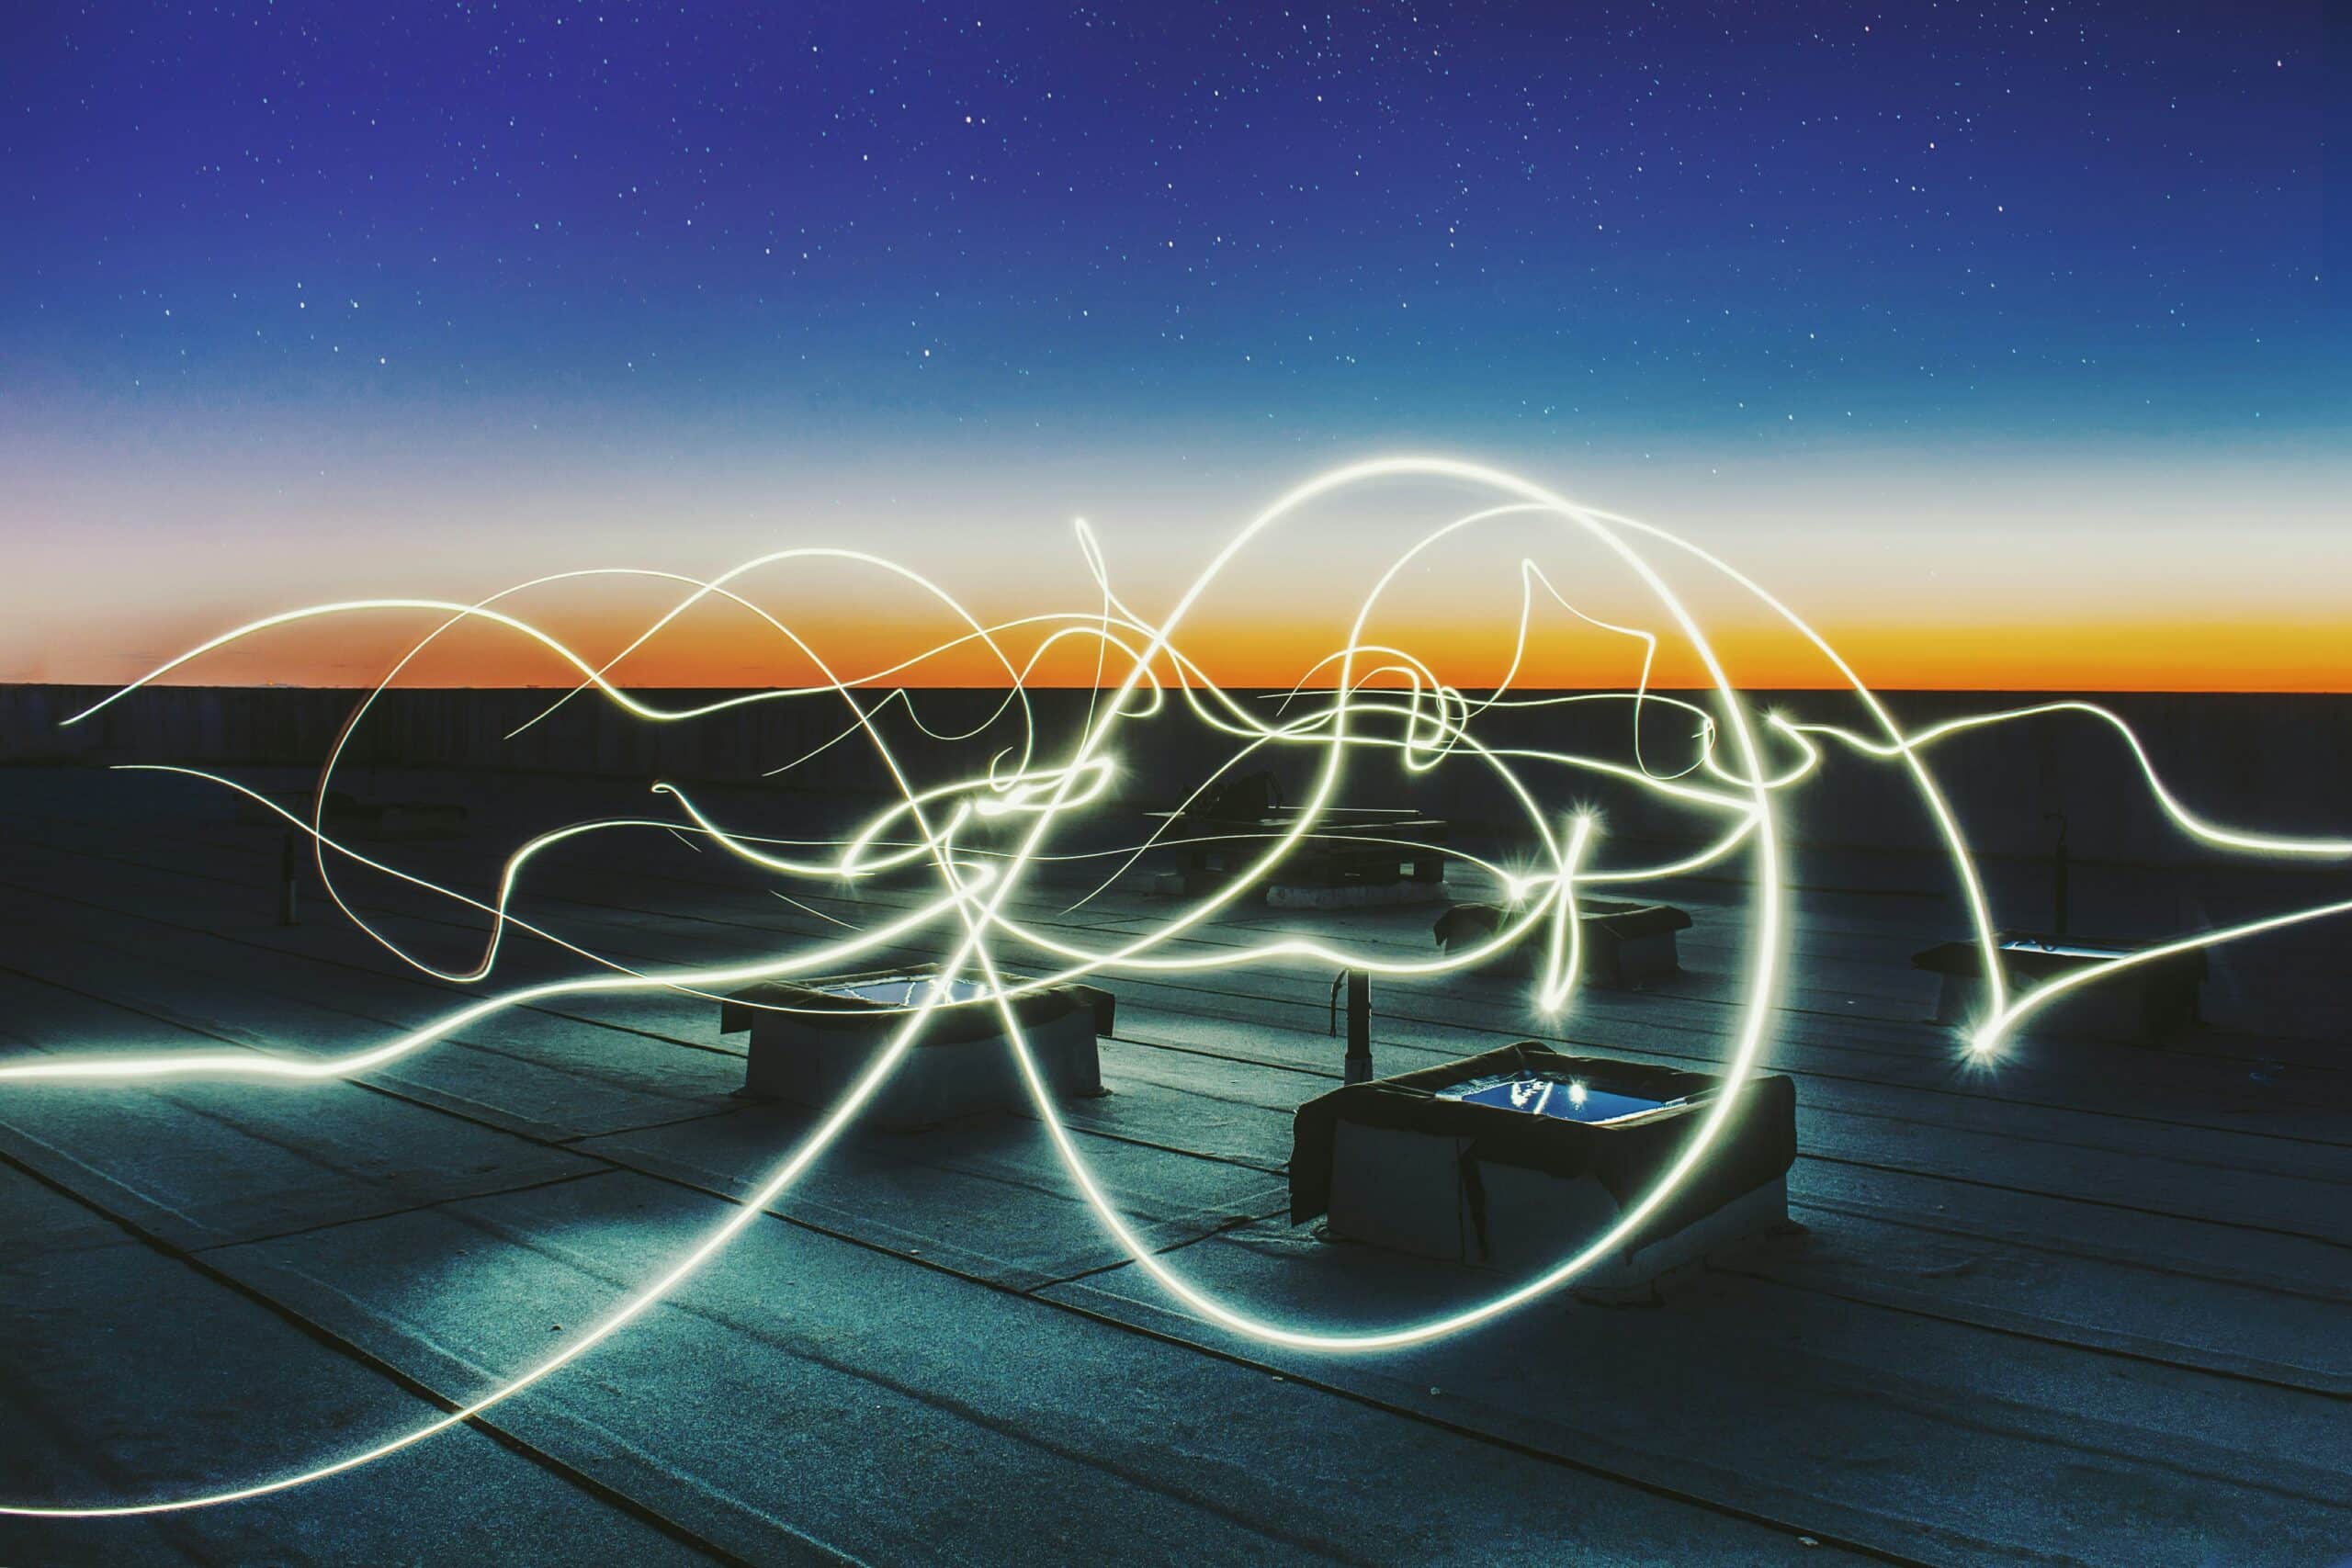 light trails in a night sky on a building roof